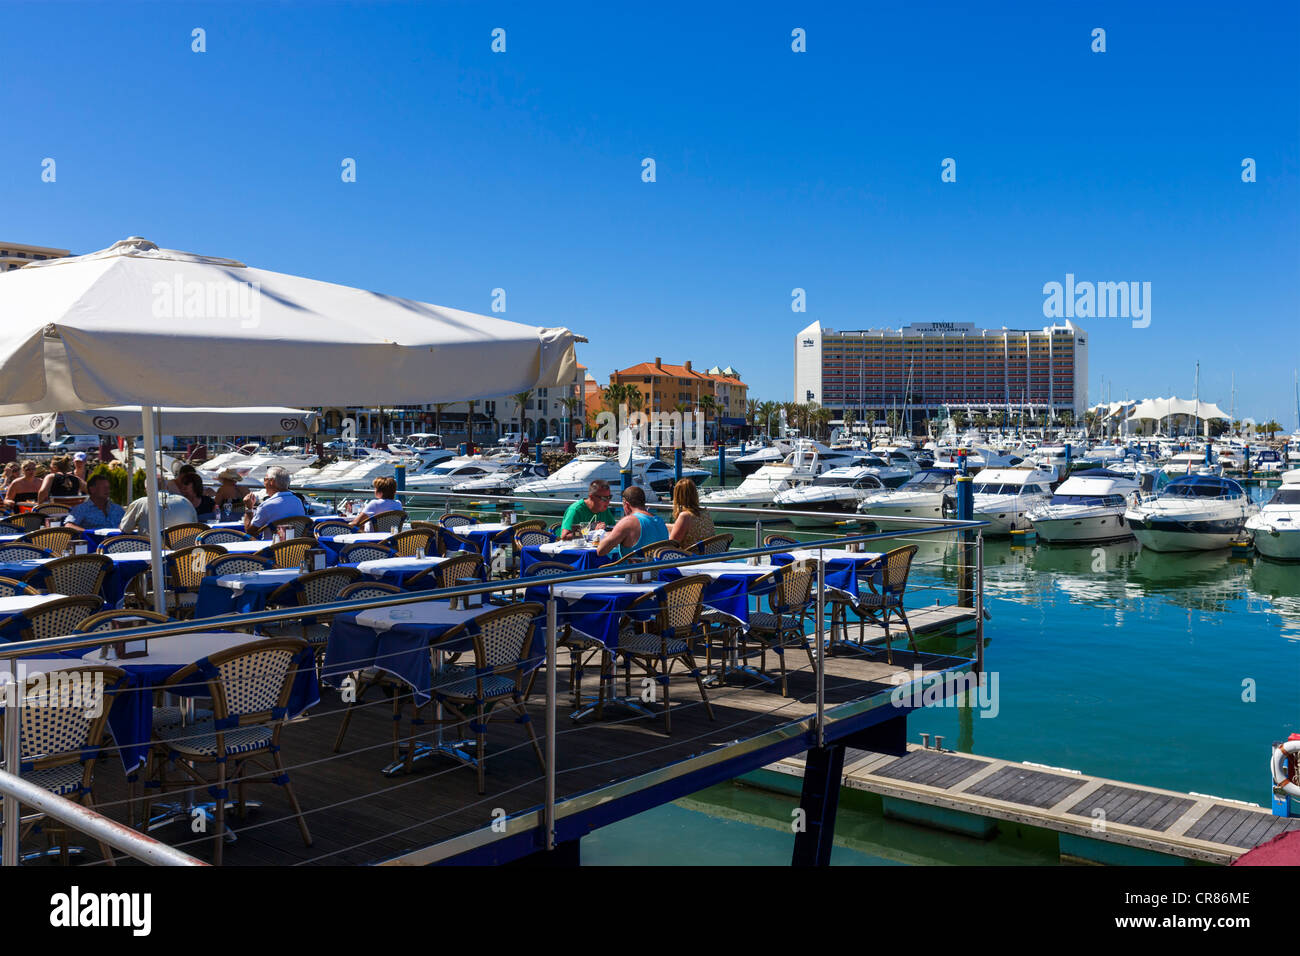 Restaurant terrace overlooking the marina in Vilamoura with the Hotel Tivoli in the background, Algarve, Portugal Stock Photo